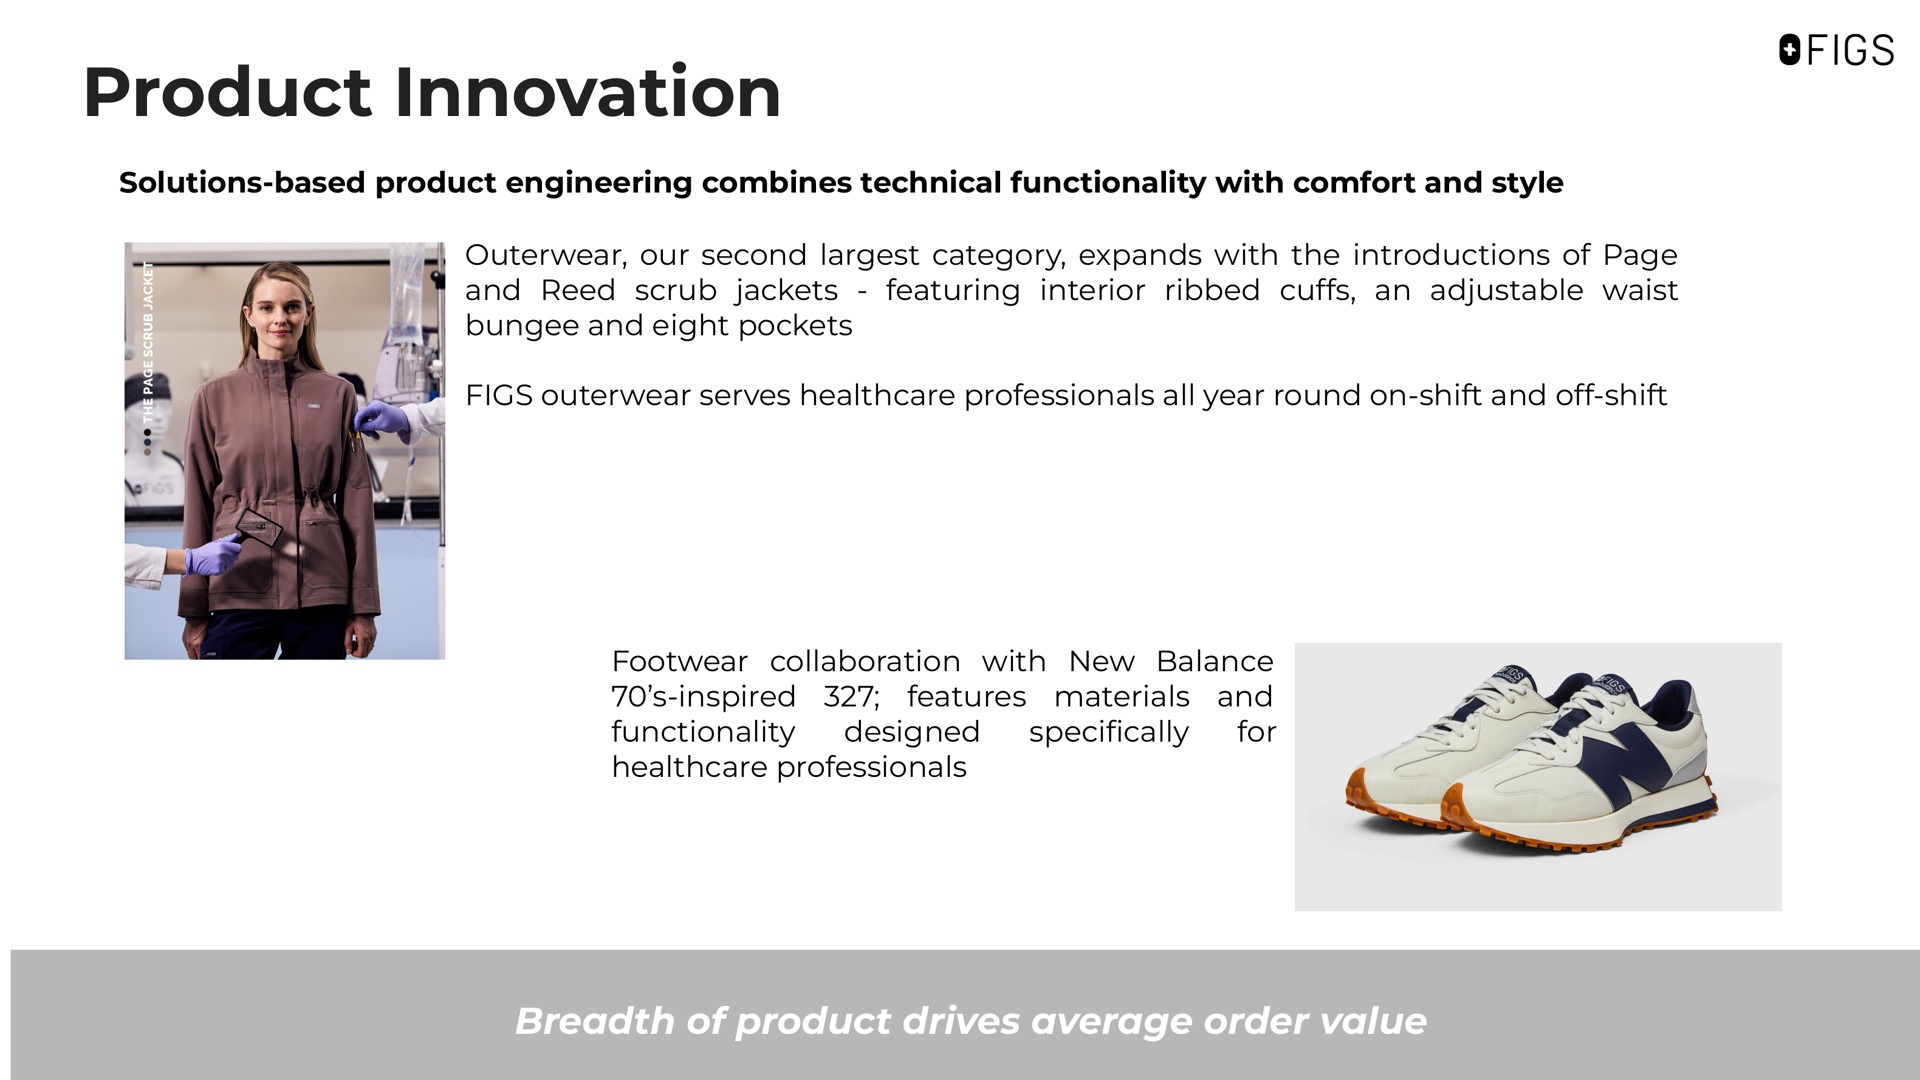 solutions based product engineering combines technical functionality with comfort and style outerwear our second category expands with the introductions of page and reed scrub jackets featuring interior ribbed cuffs an adjustable waist bungee and eight pockets figs outerwear serves professionals all year round on shift and off shift footwear collaboration with new balance and inspired for designed functionality professionals materials specifically features | FIGS